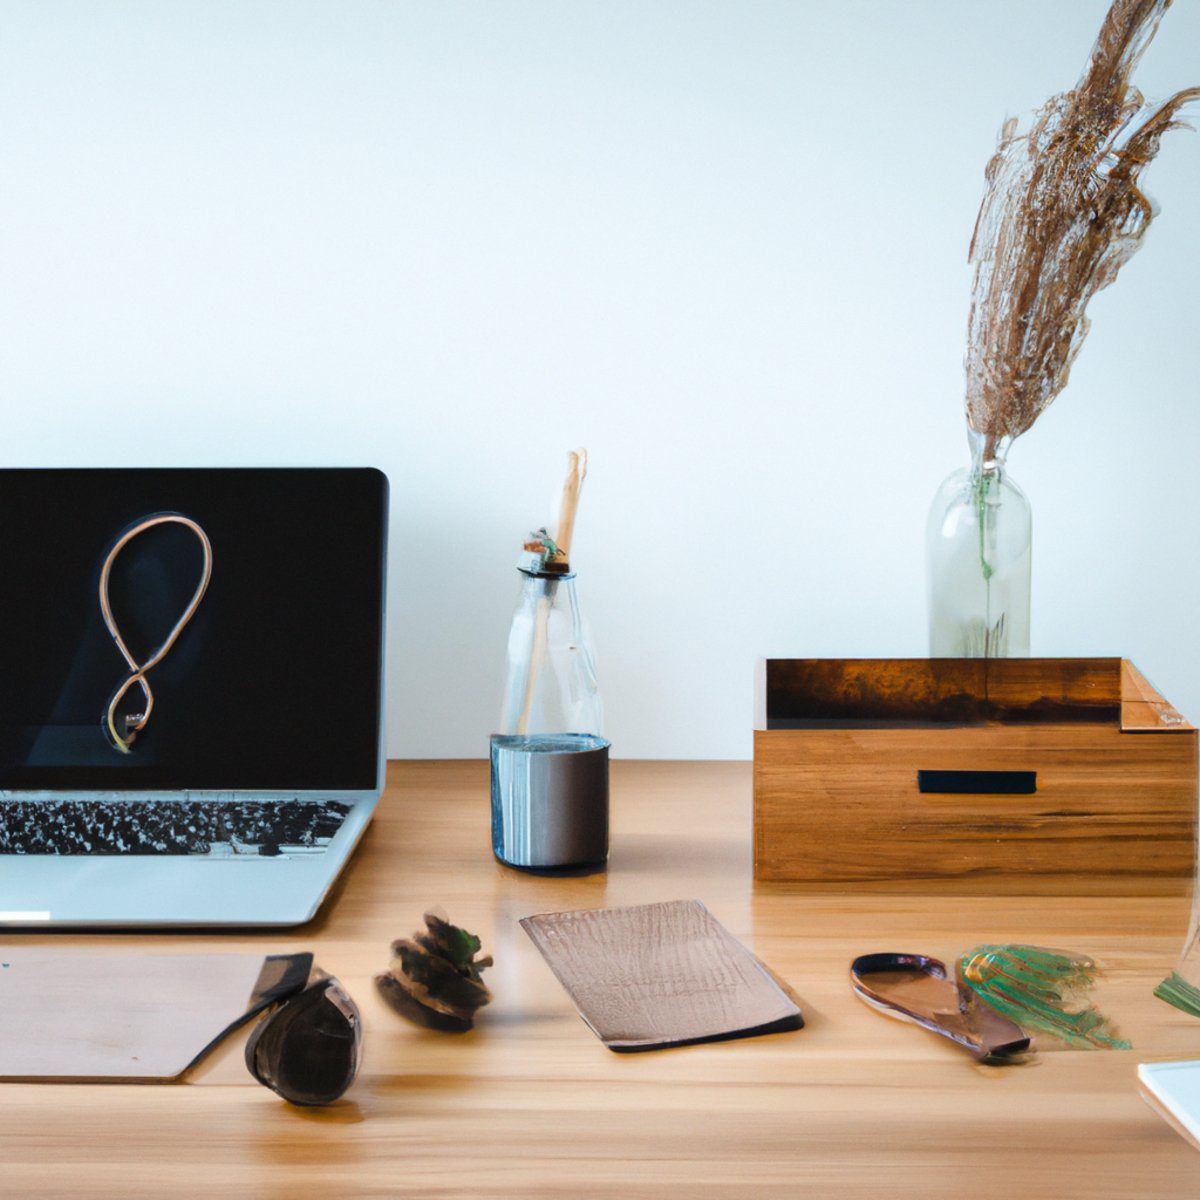 Serene workspace with wooden desk, laptop, plant, tea, journal, headphones. Promotes mindfulness and self-care.